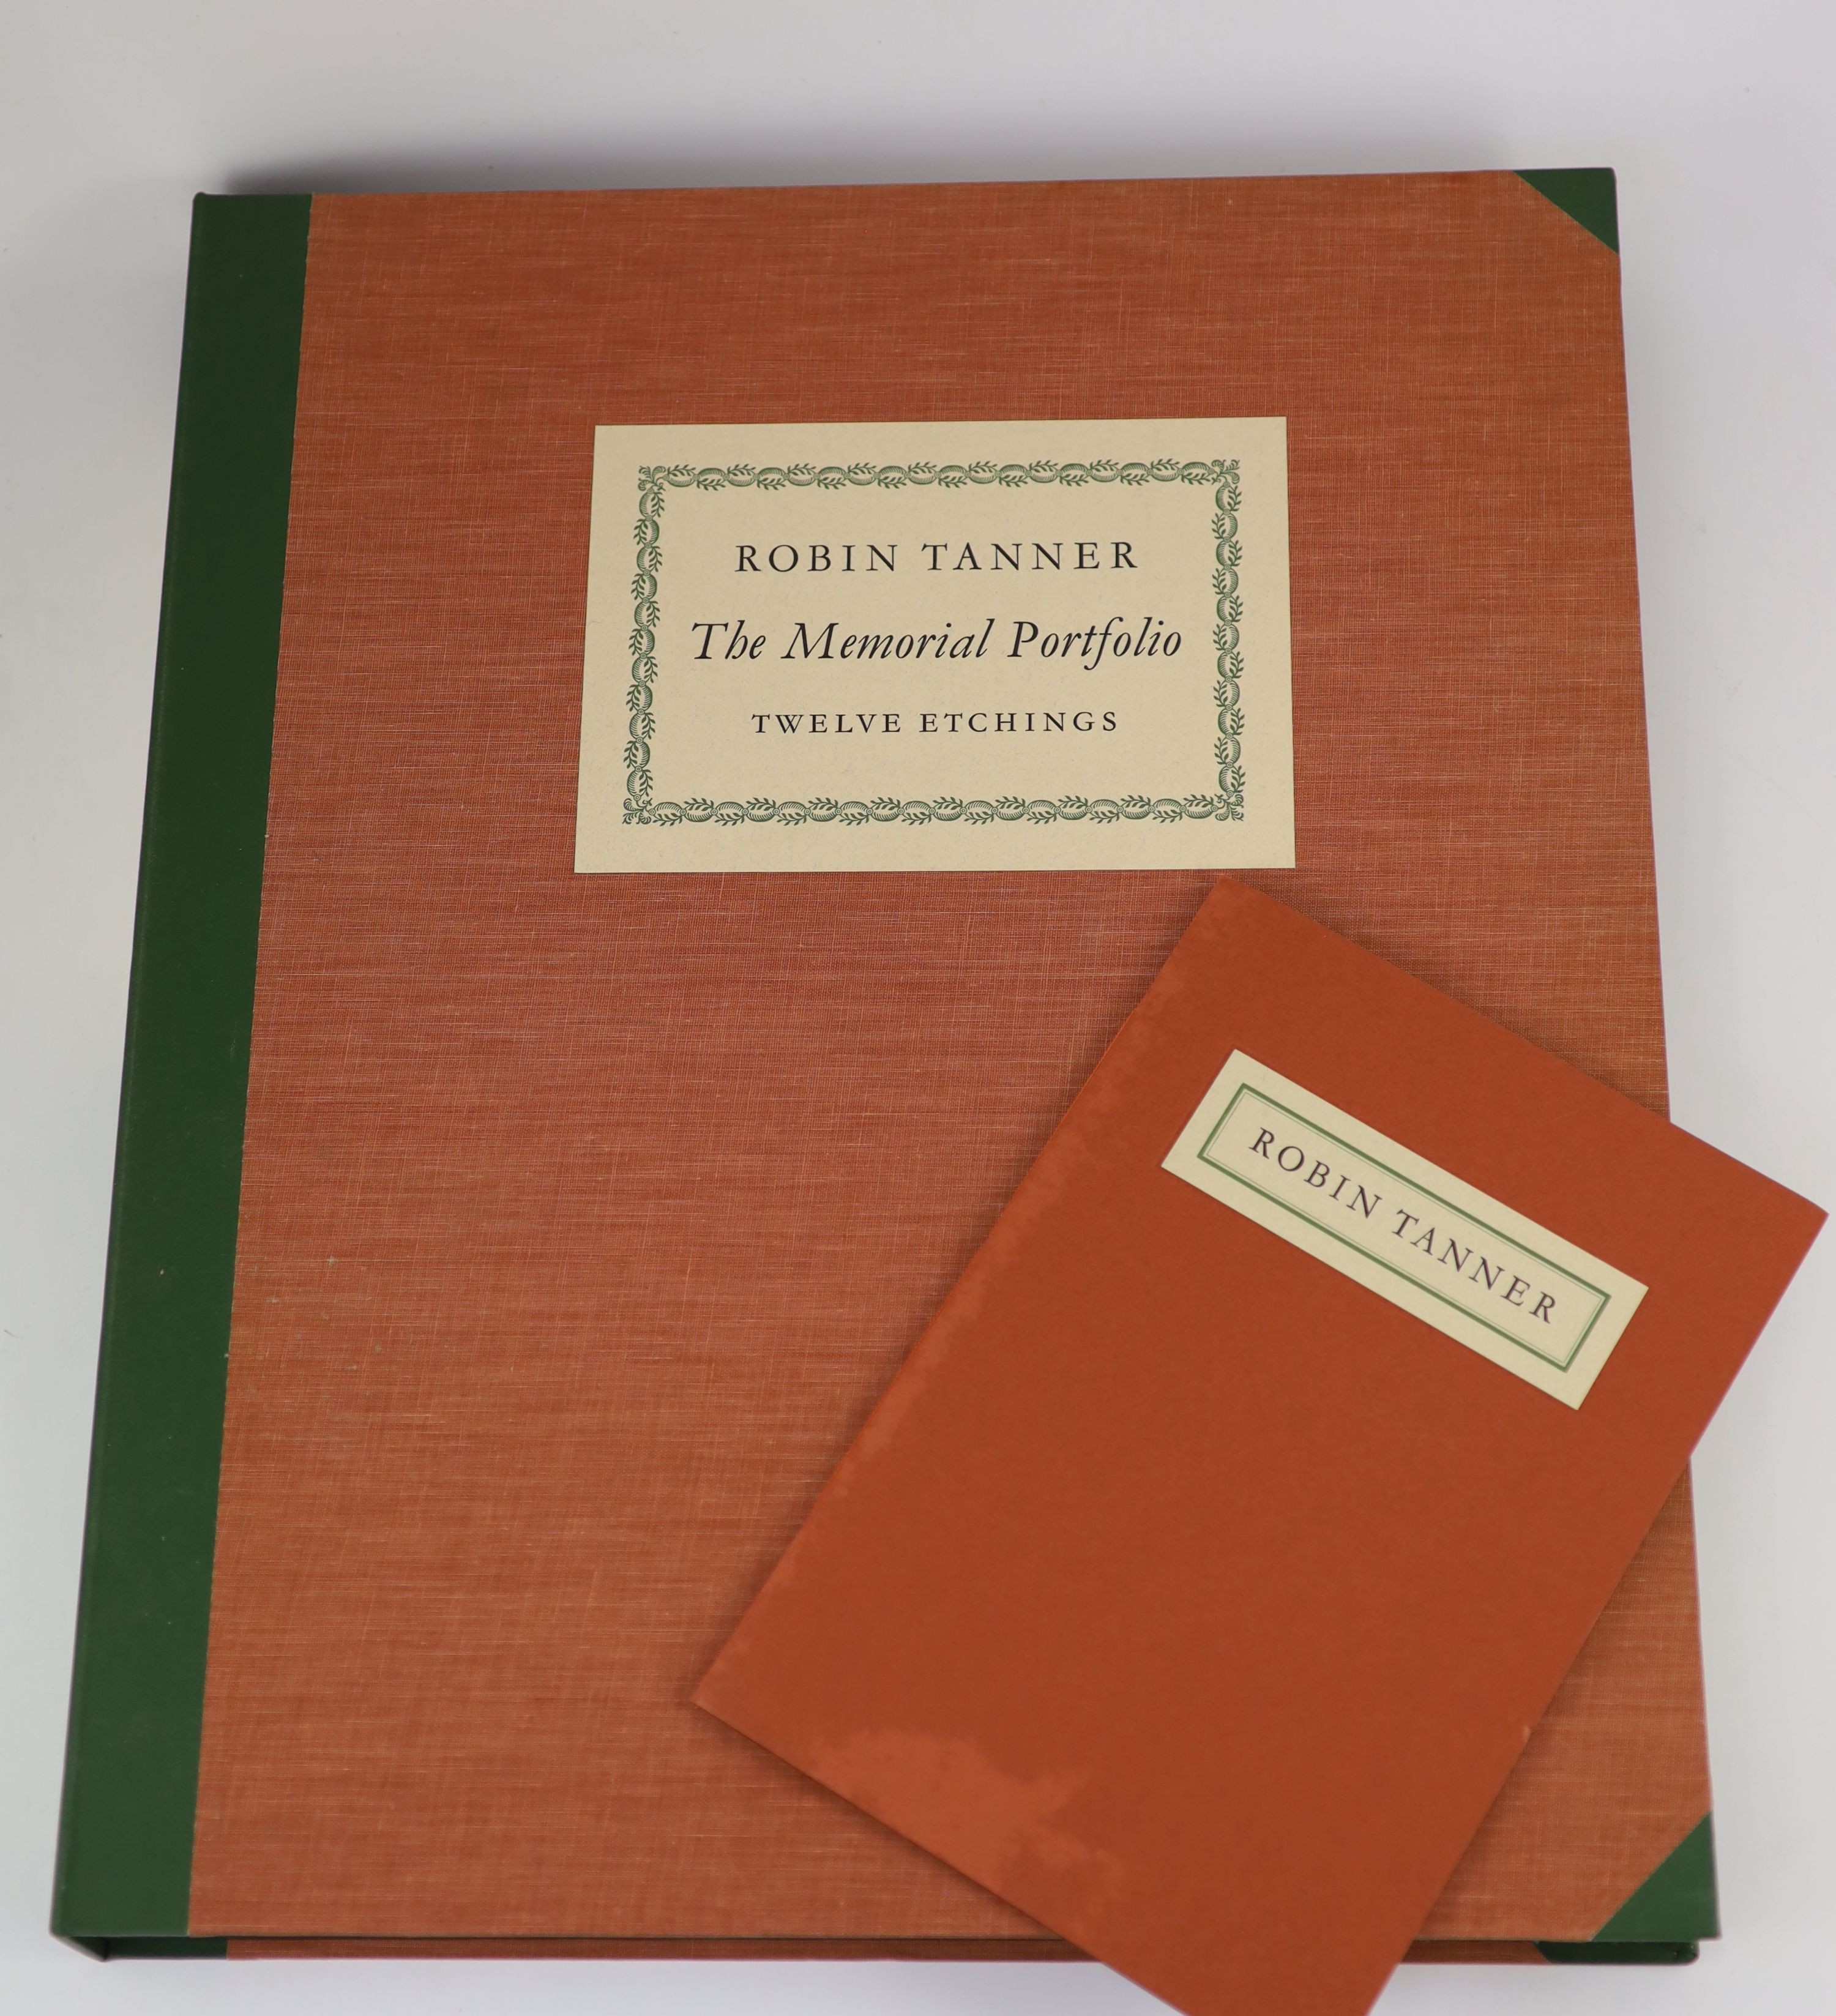 Tanner, Robin (British 1904-1988) - The Memorial Portfolio, folio, the complete set of 12 etchings with tissue guards, each numbered 33/100 in pencil, loose, on Fabriano paper, with wide margins, introduction by Merivale